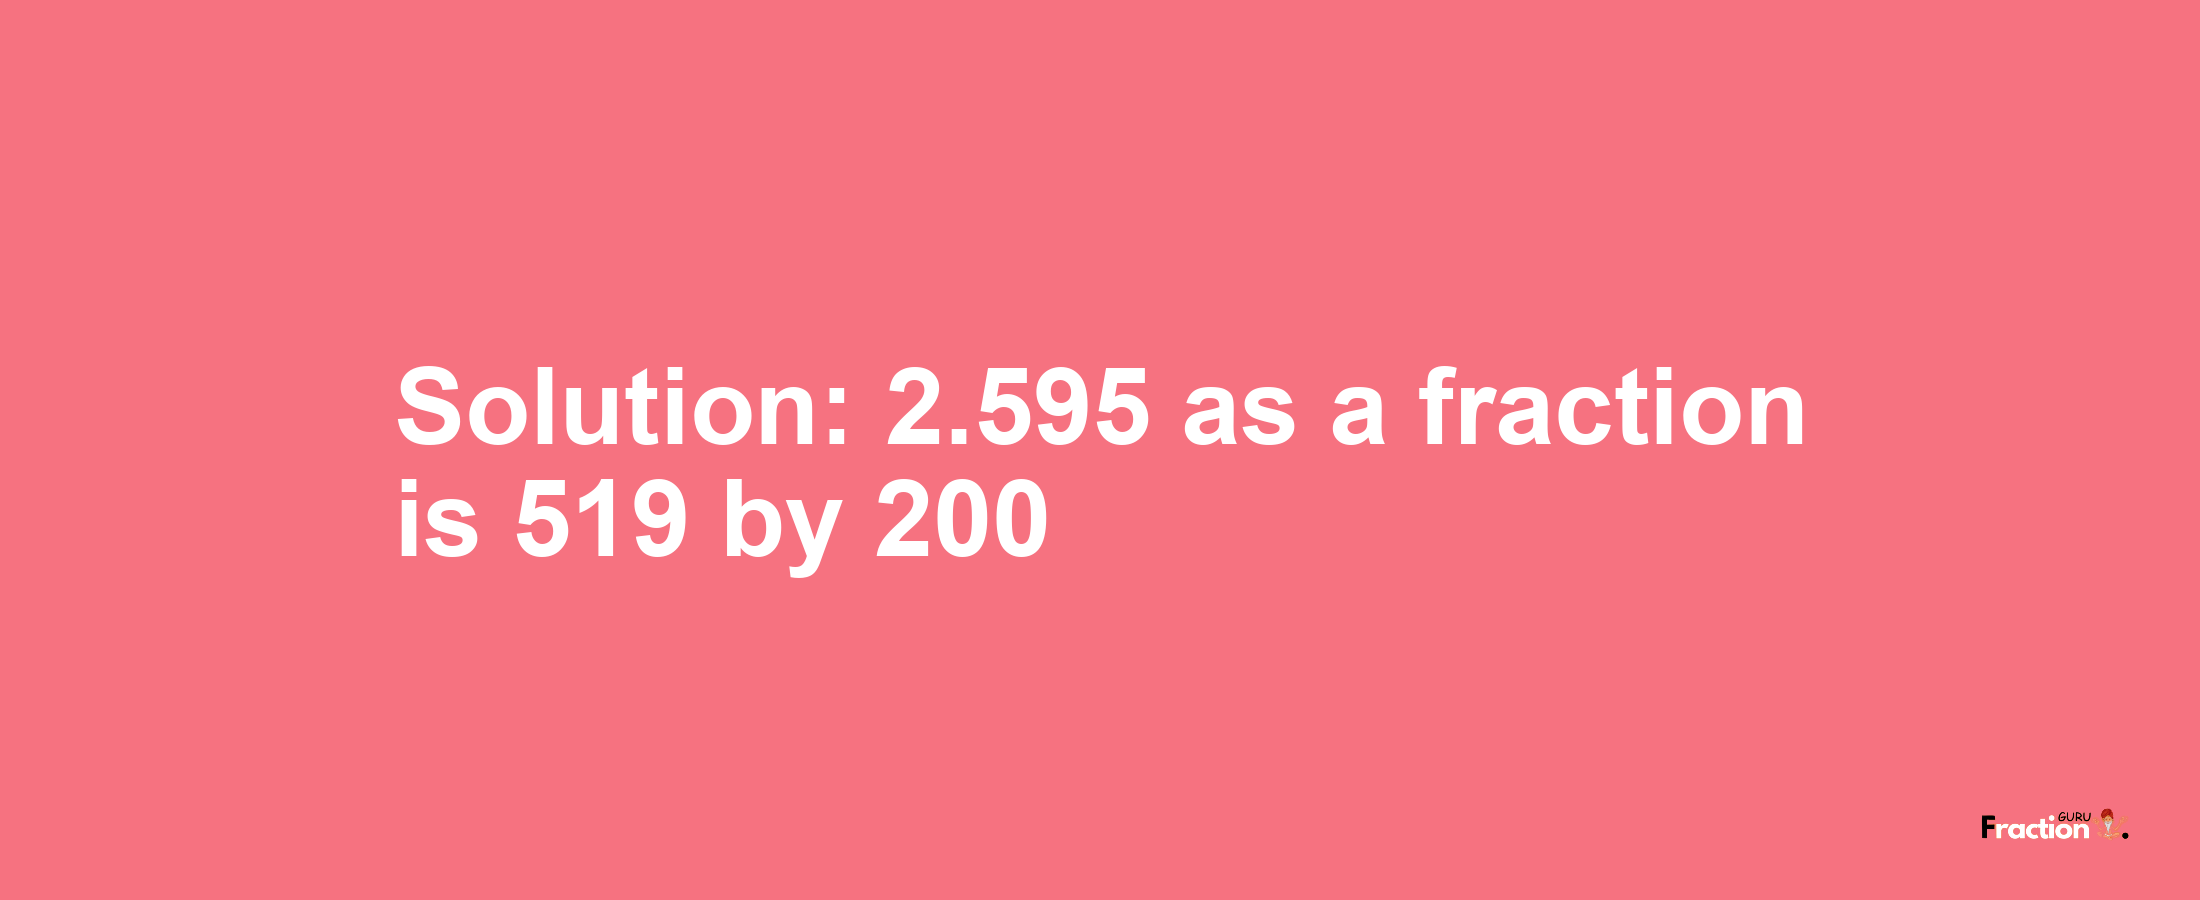 Solution:2.595 as a fraction is 519/200